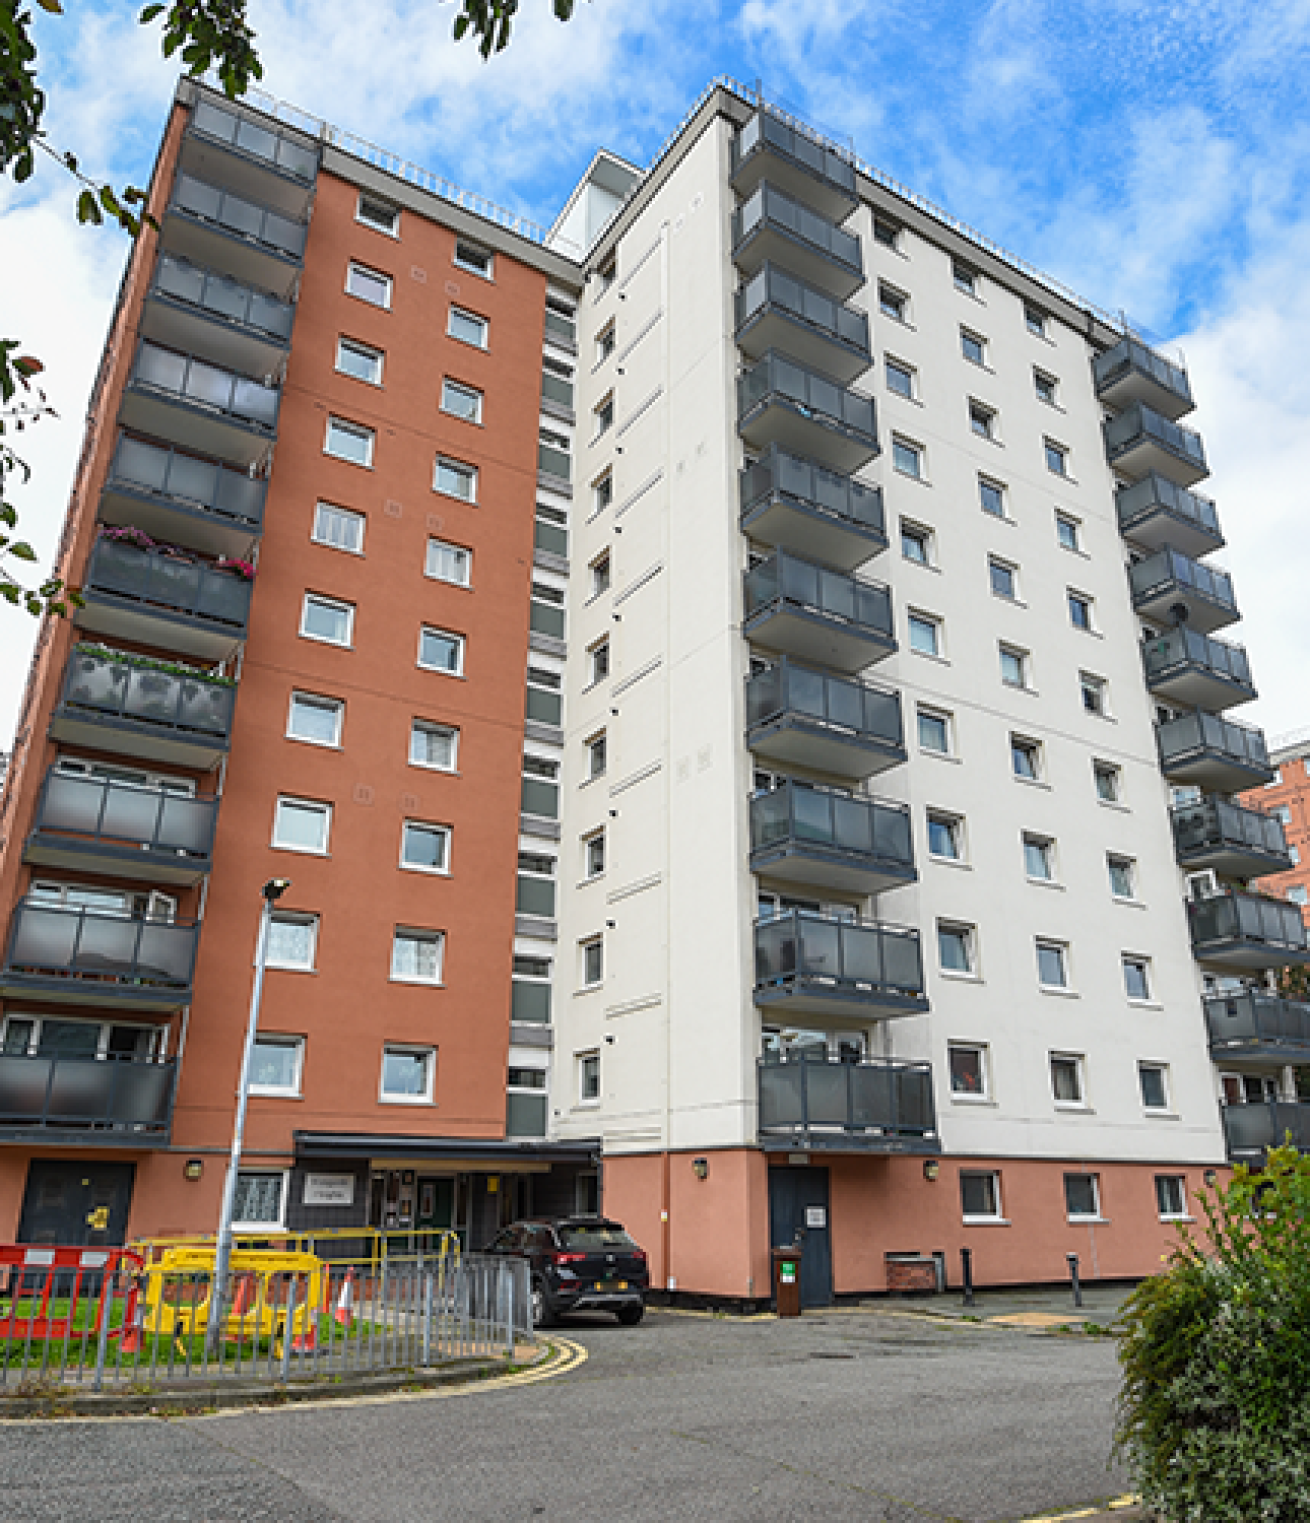 Exterior of the high rise accommodation at Haygarth Heights